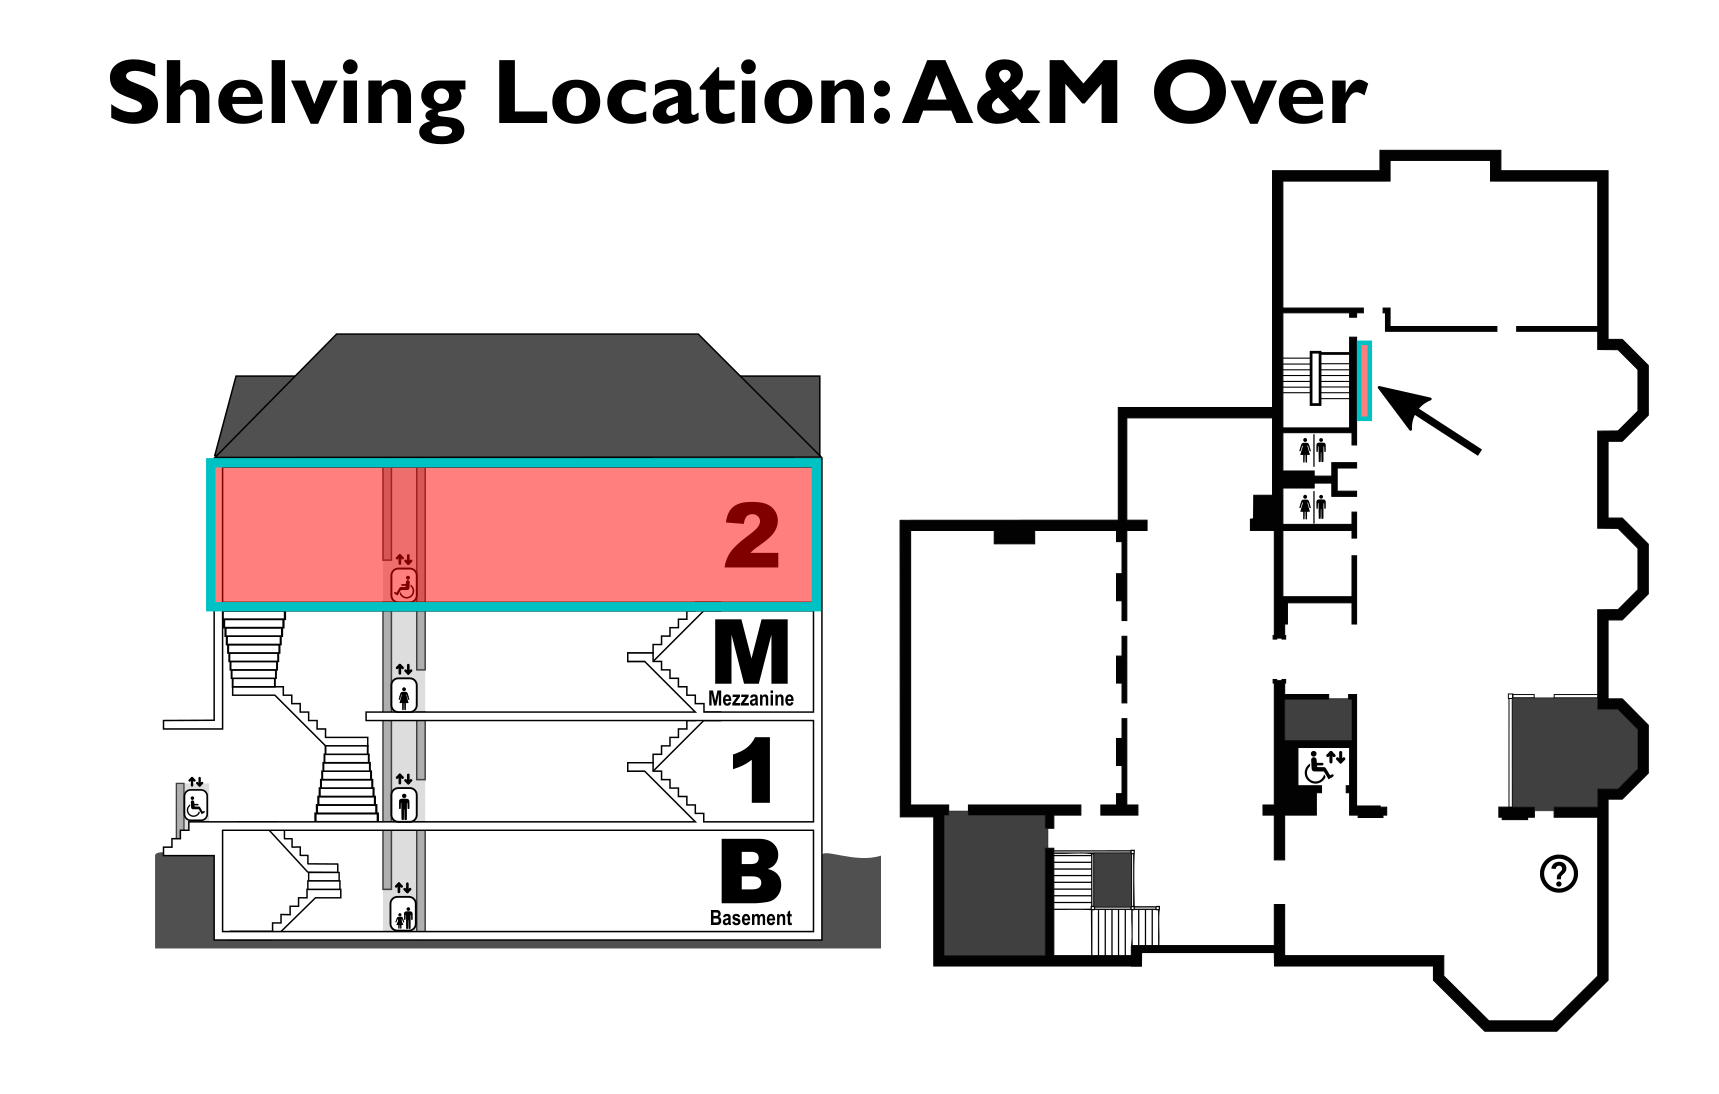 A&M Over location